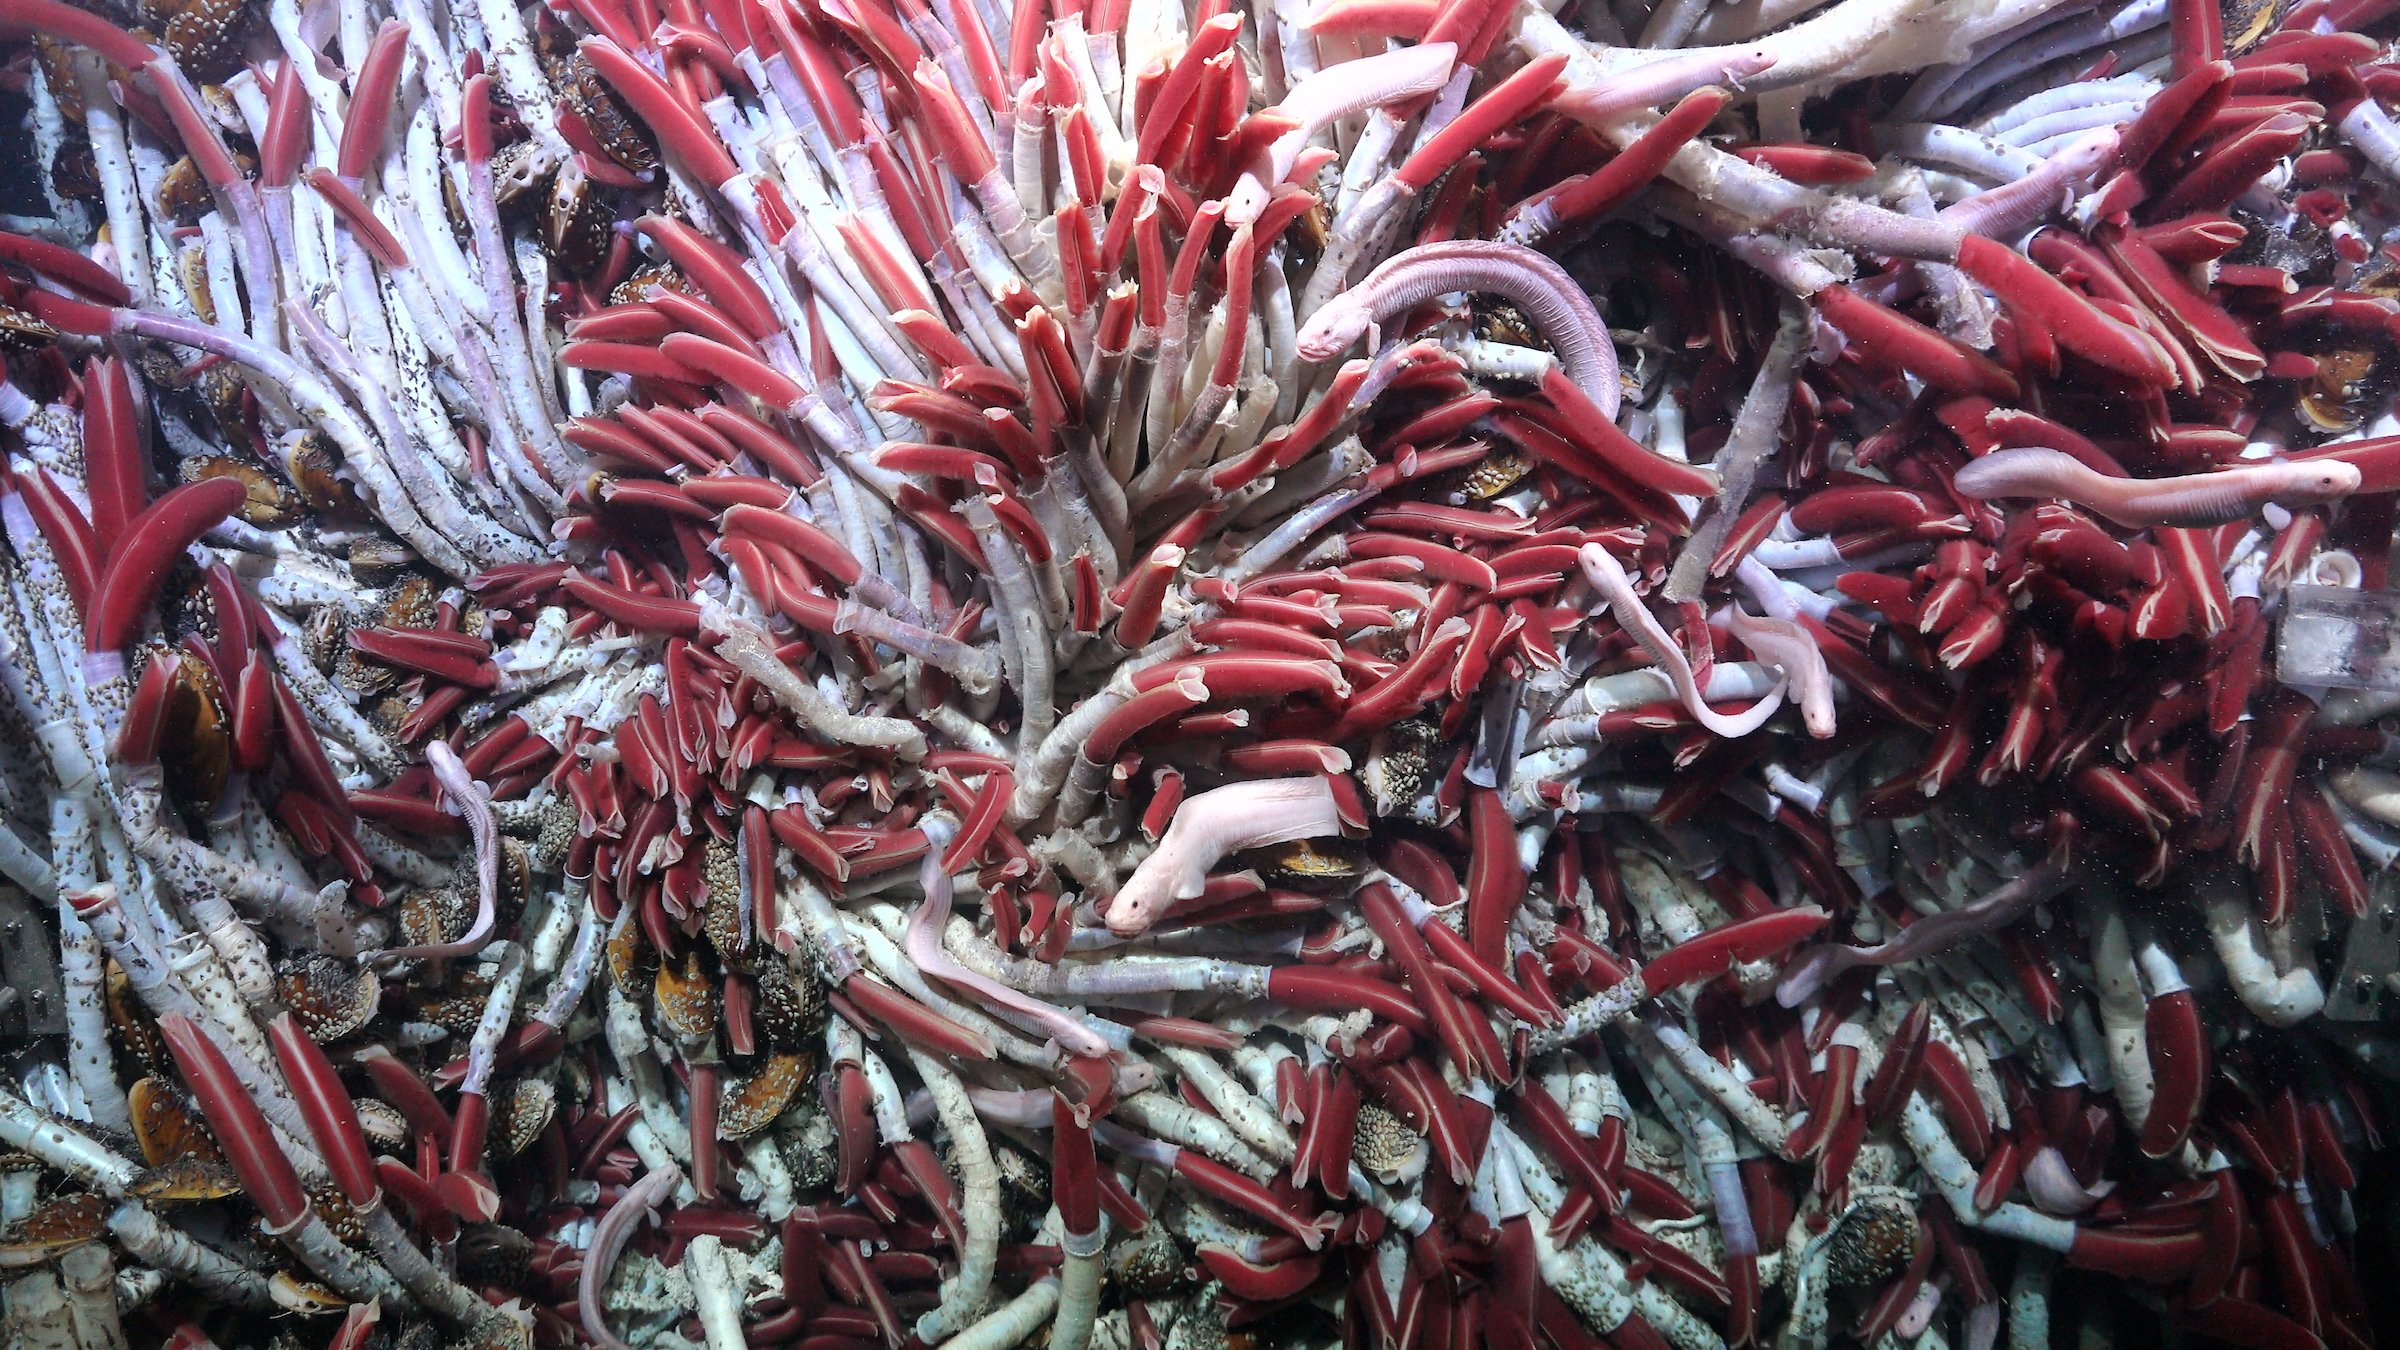 3 Tube worms